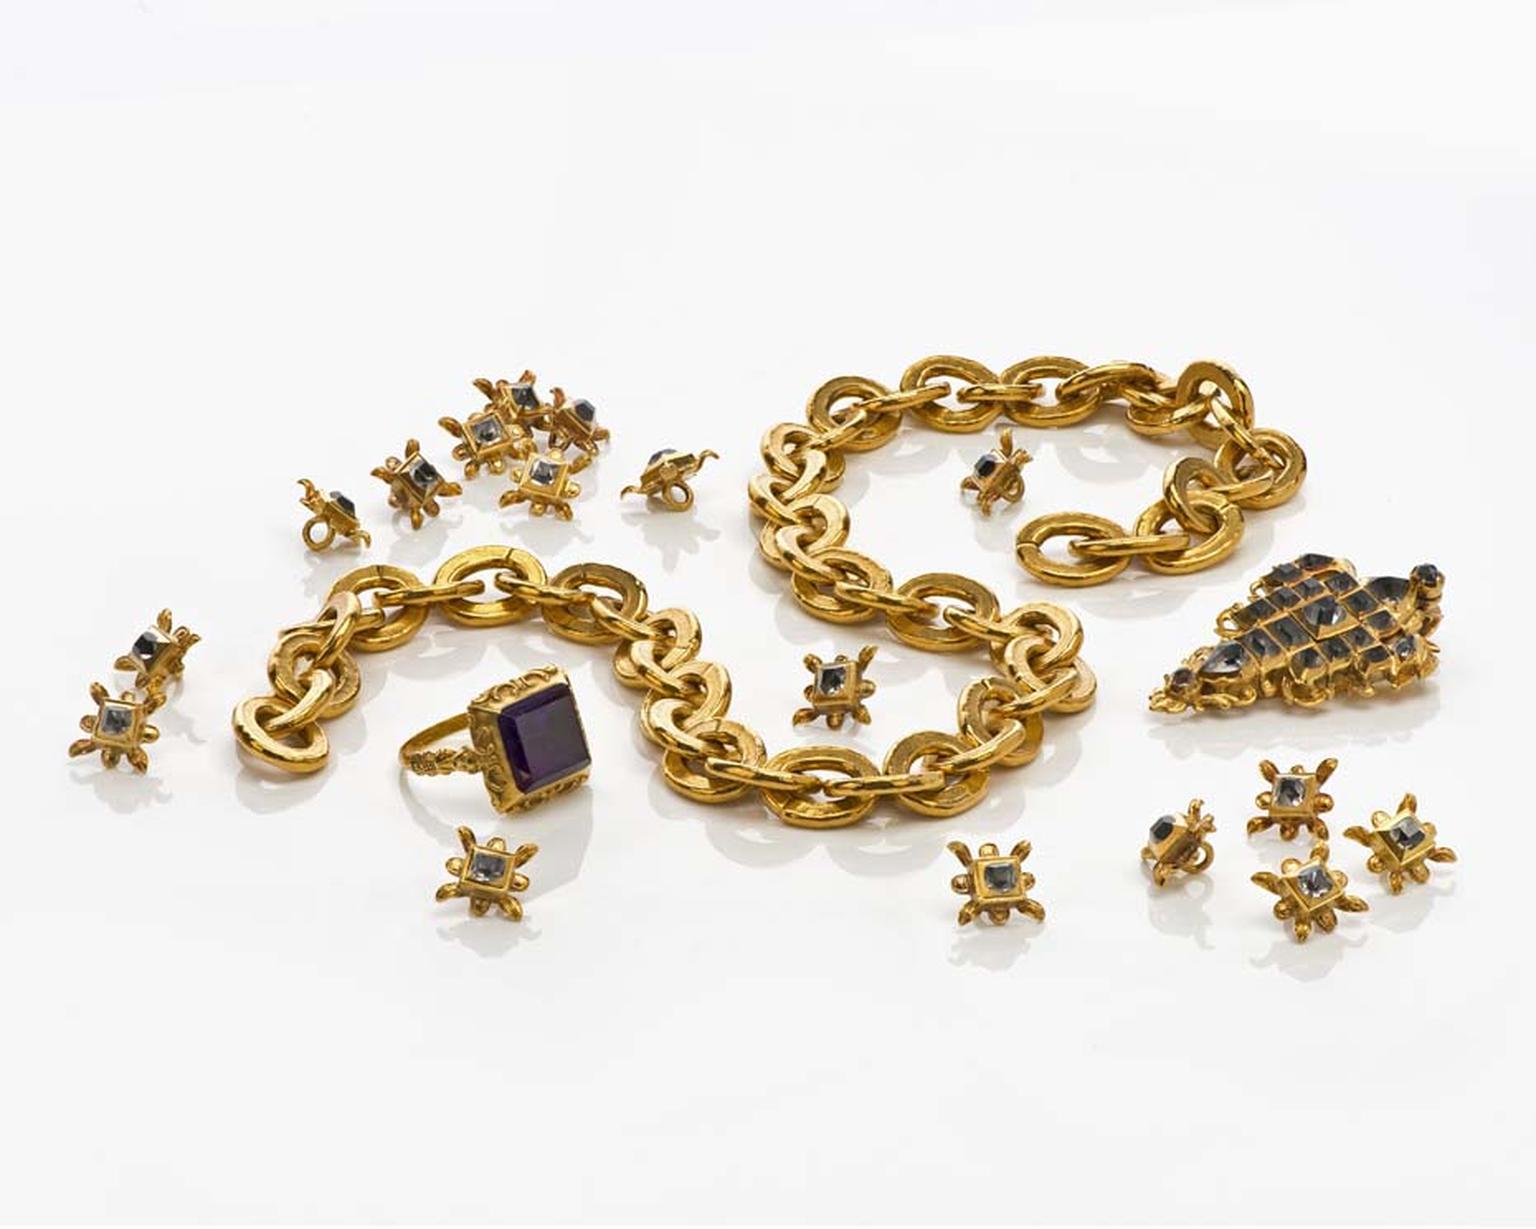 This remarkable set of 18 buttons, jewel and chain, being sold by Deborah Elvira for €330,000 at TEFAF Maastricht, was recovered from the Spanish Galleon Nuestra Señora de la Pura y Limpia Concepción in the first half of the 17th century.